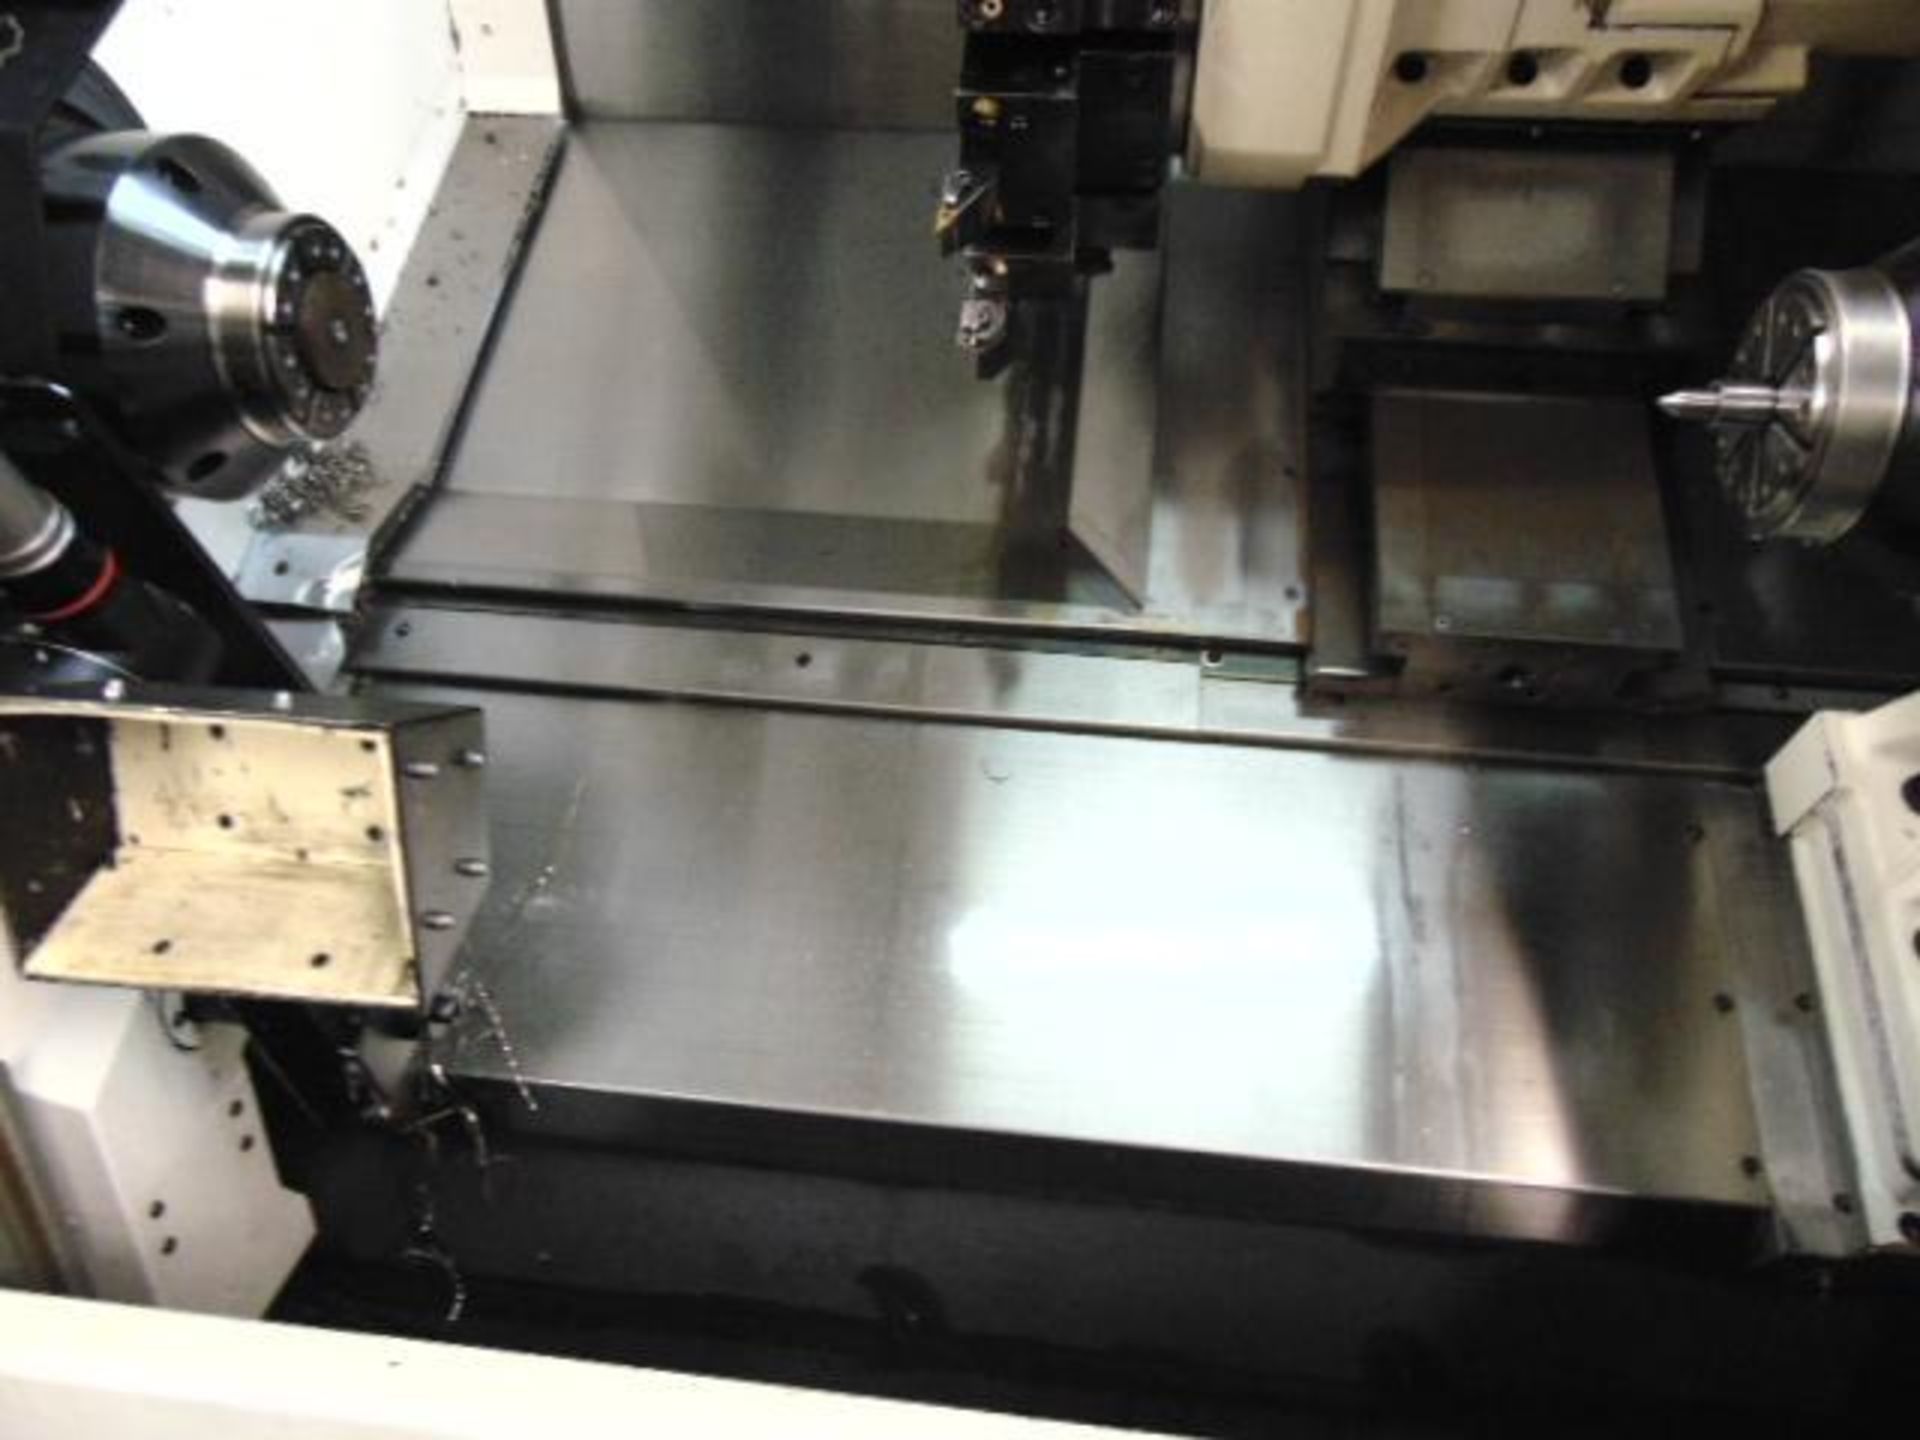 MULTI-AXIS CNC TURNING CENTER, OKUMA MDL. LB3000EXII-MYW 800 SPACE TURN, new 2015, 0SP-P300L CNC con - Image 8 of 24